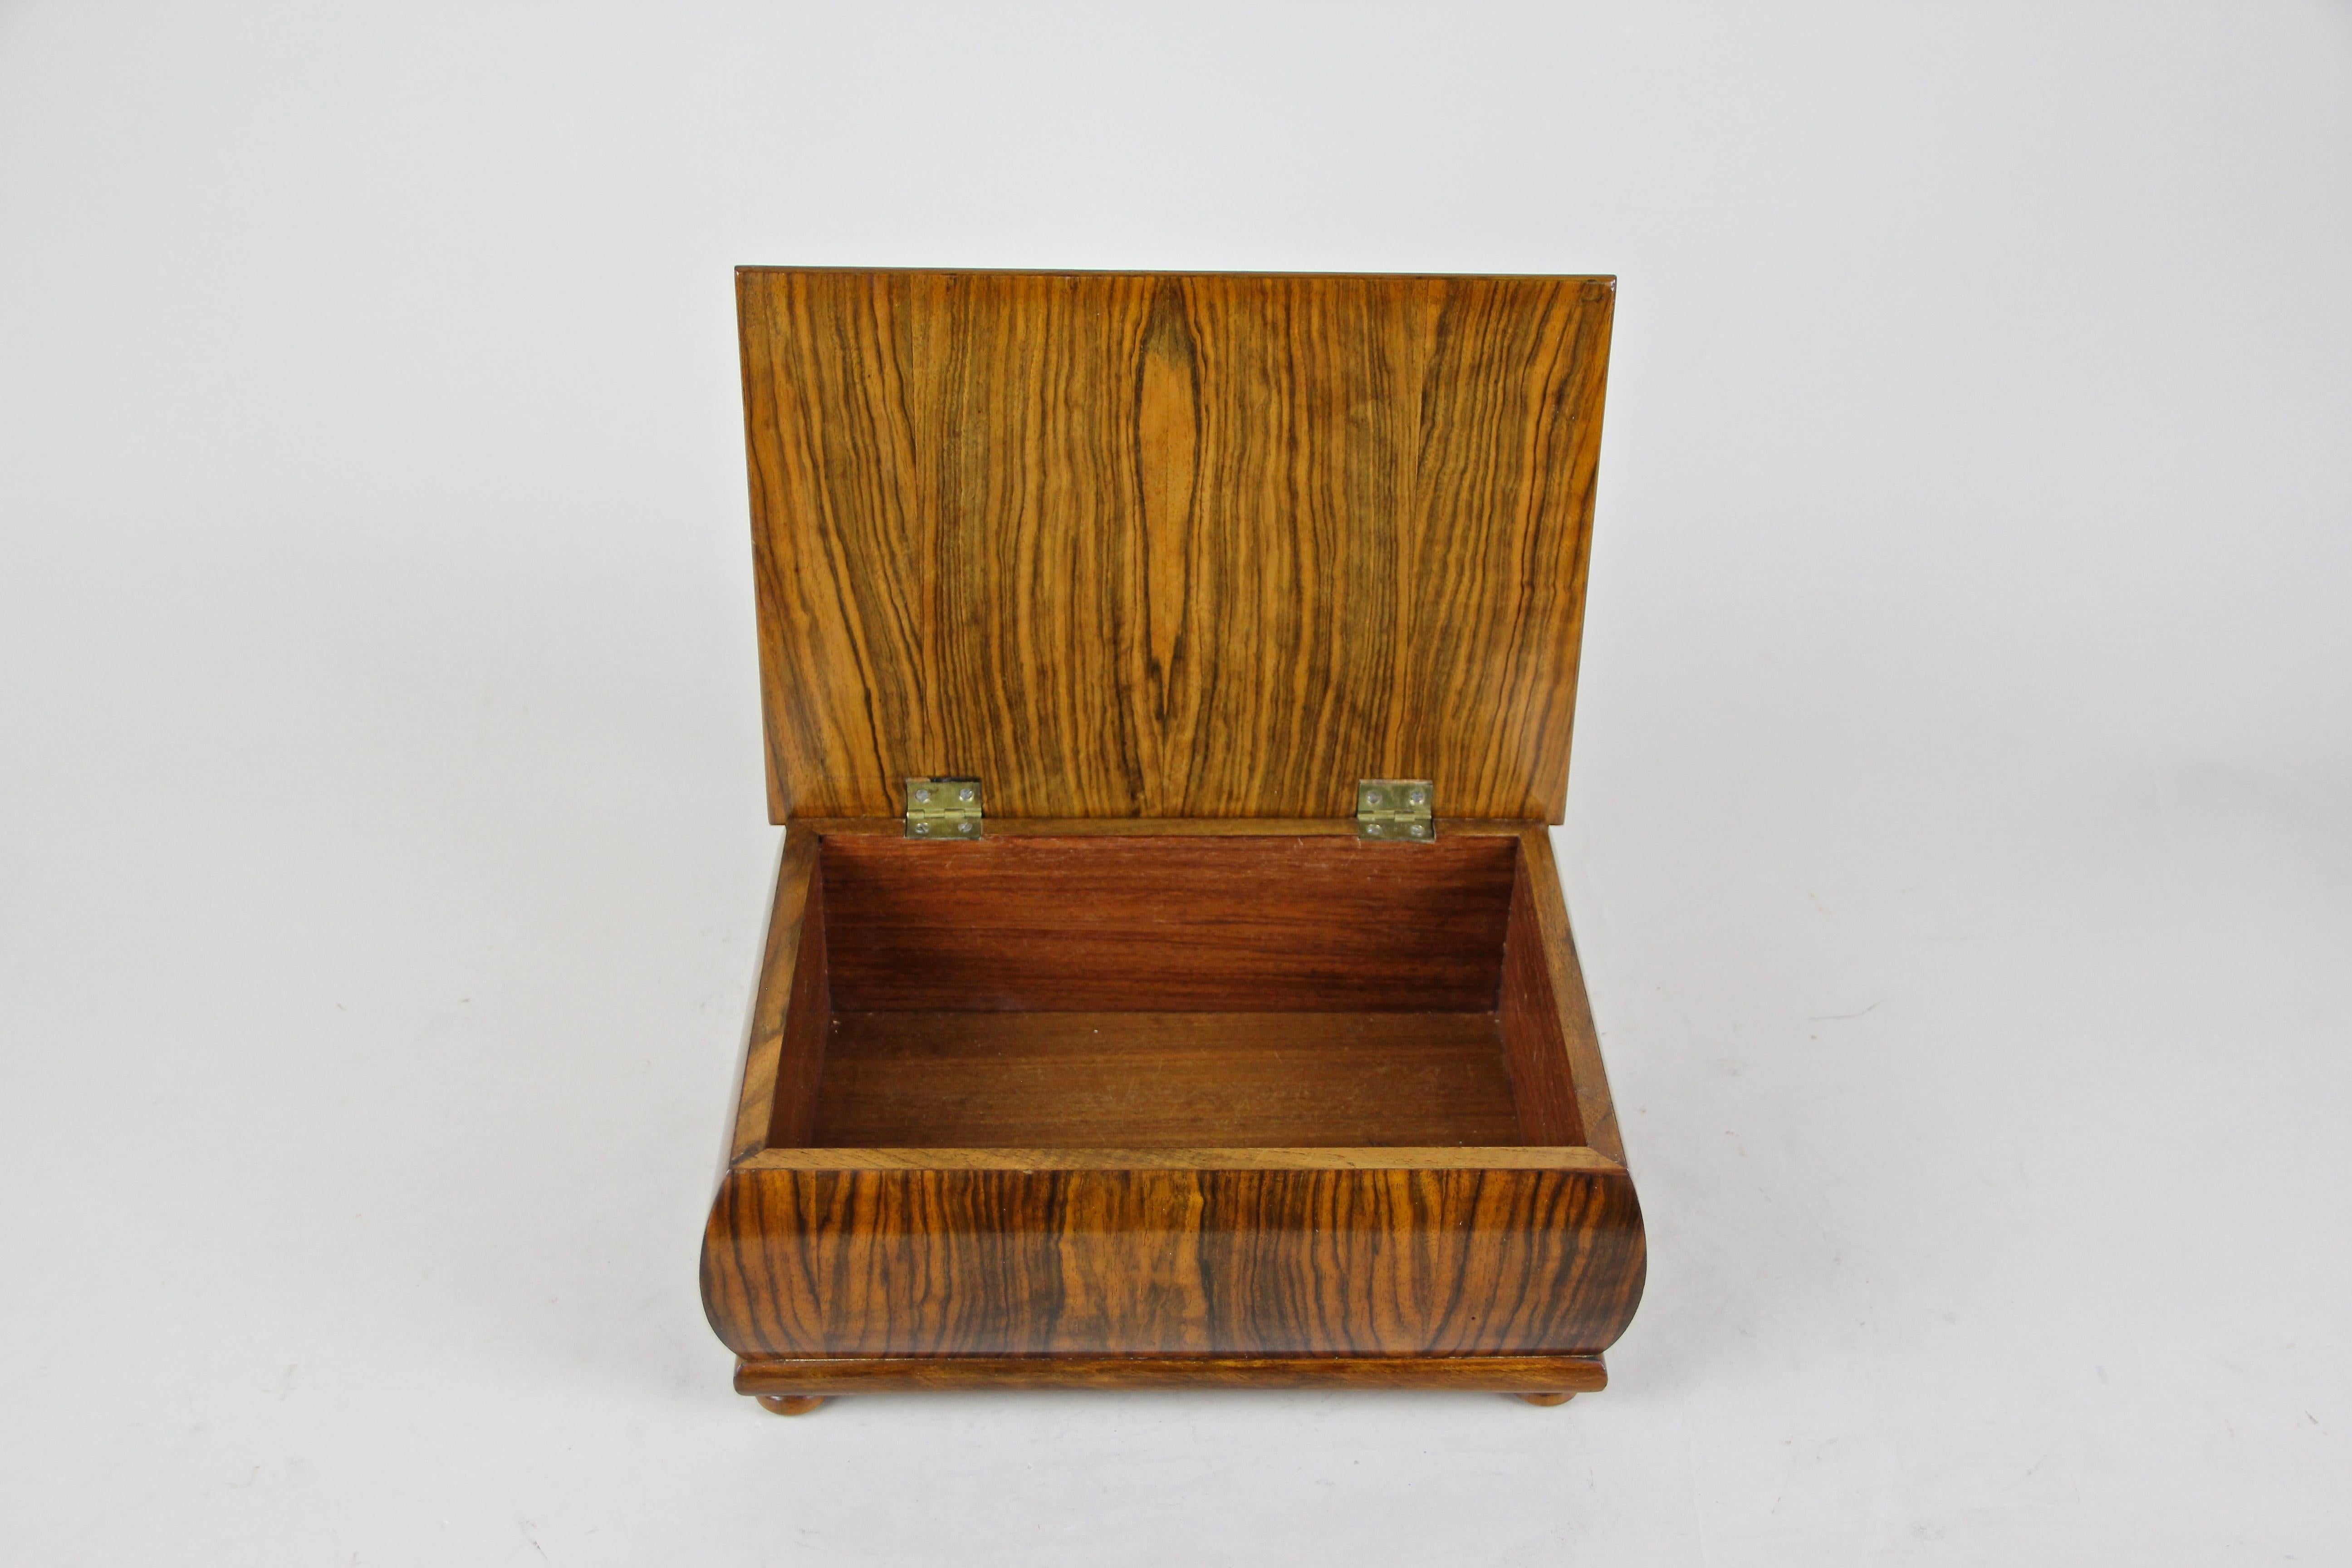 Decorative wooden Art Deco box with wonderful inlay work out of Austria, around 1920. Fine burl and nut wood veneer was arranged in a great manner to give this bulbous Art Deco box this unusual look. In the middle of the amazing book-matched burl